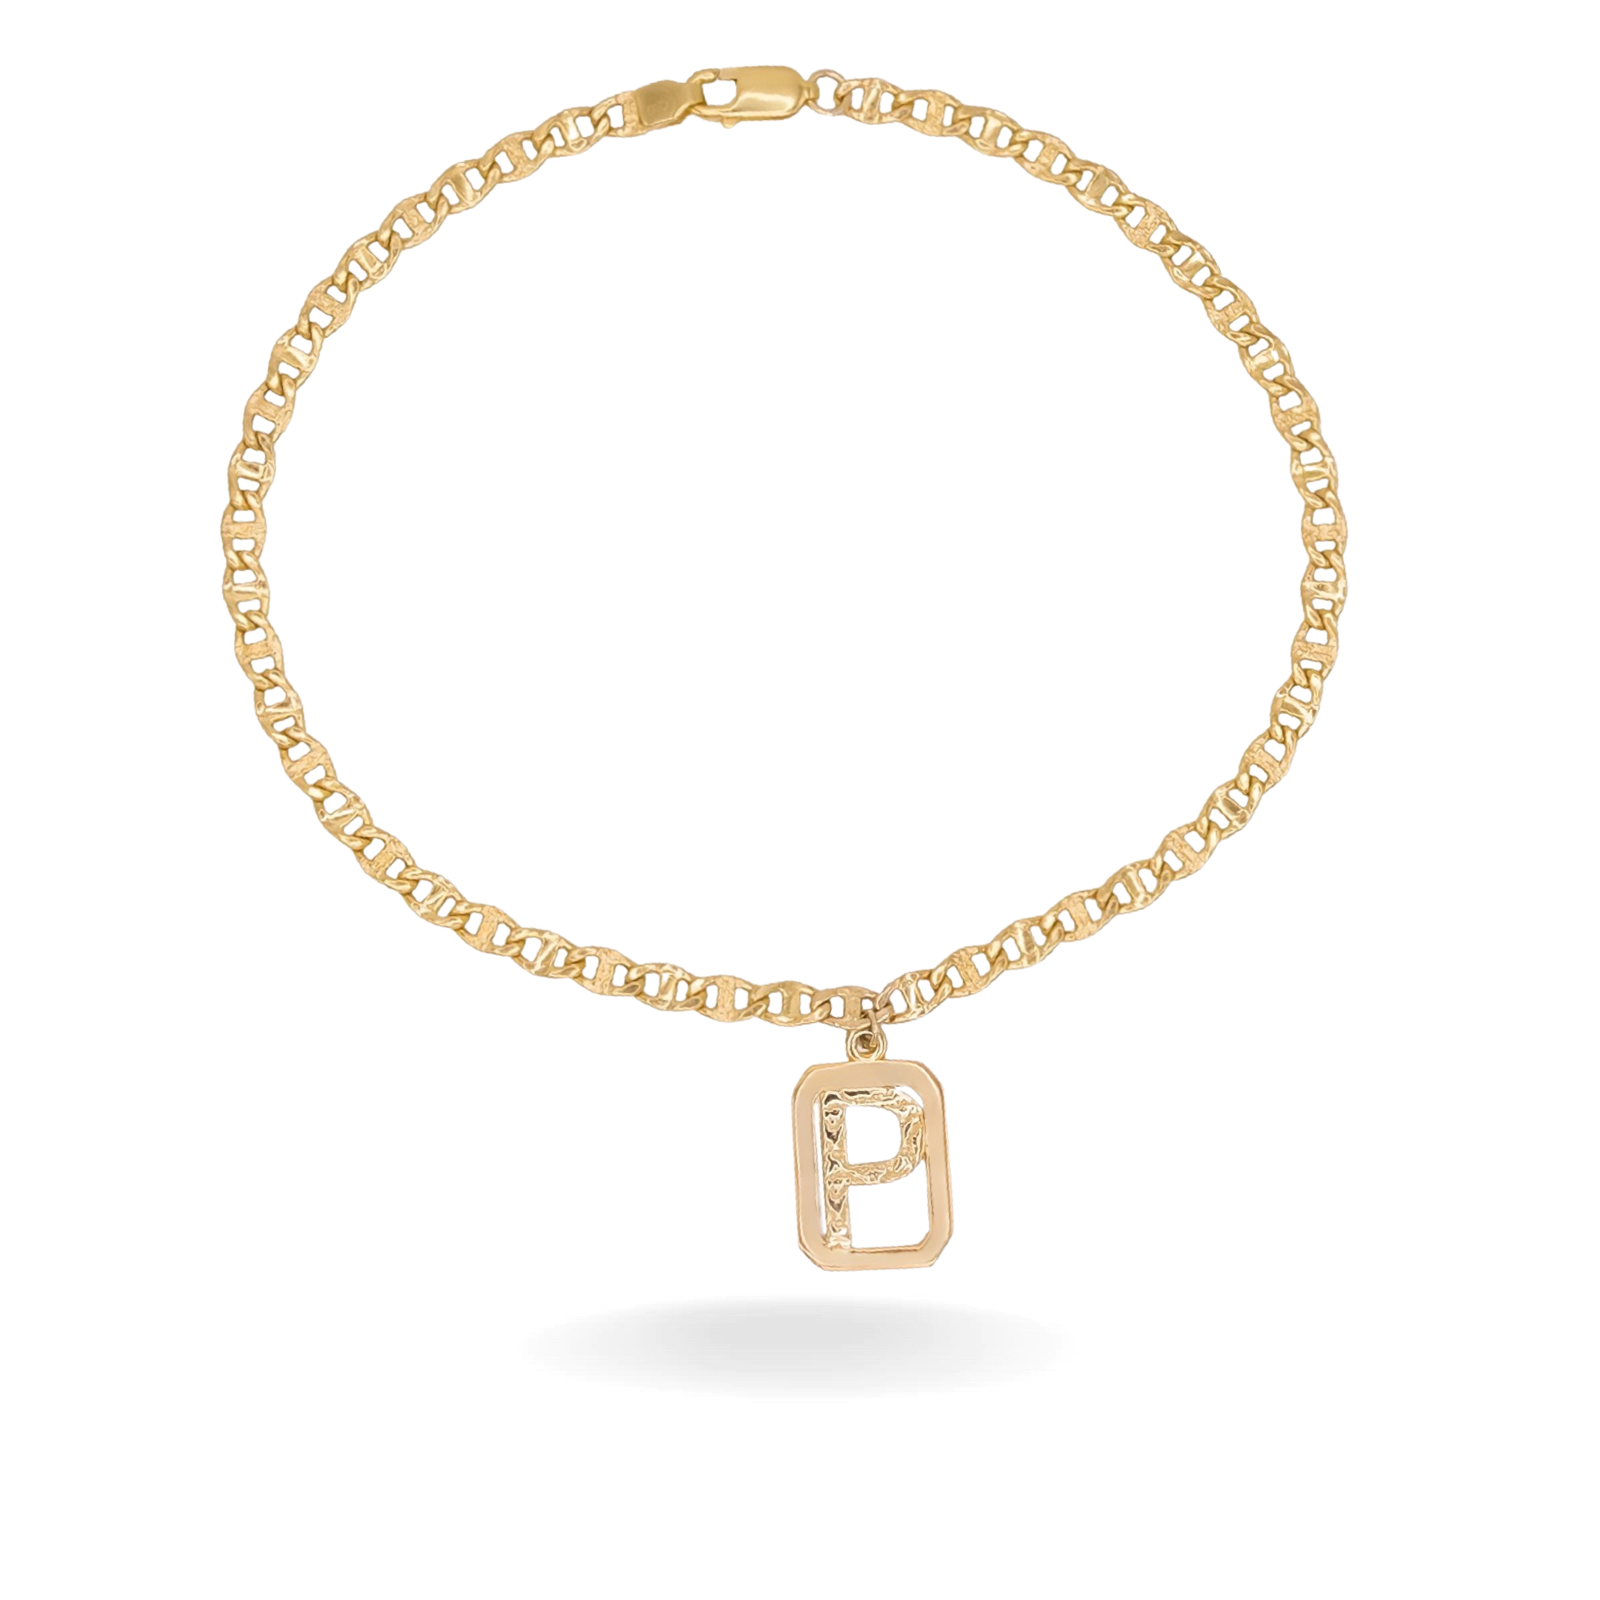 14K YELLOW GOLD EMERALD-CUT INITIAL CHARM NUGGET MARINER ANKLET